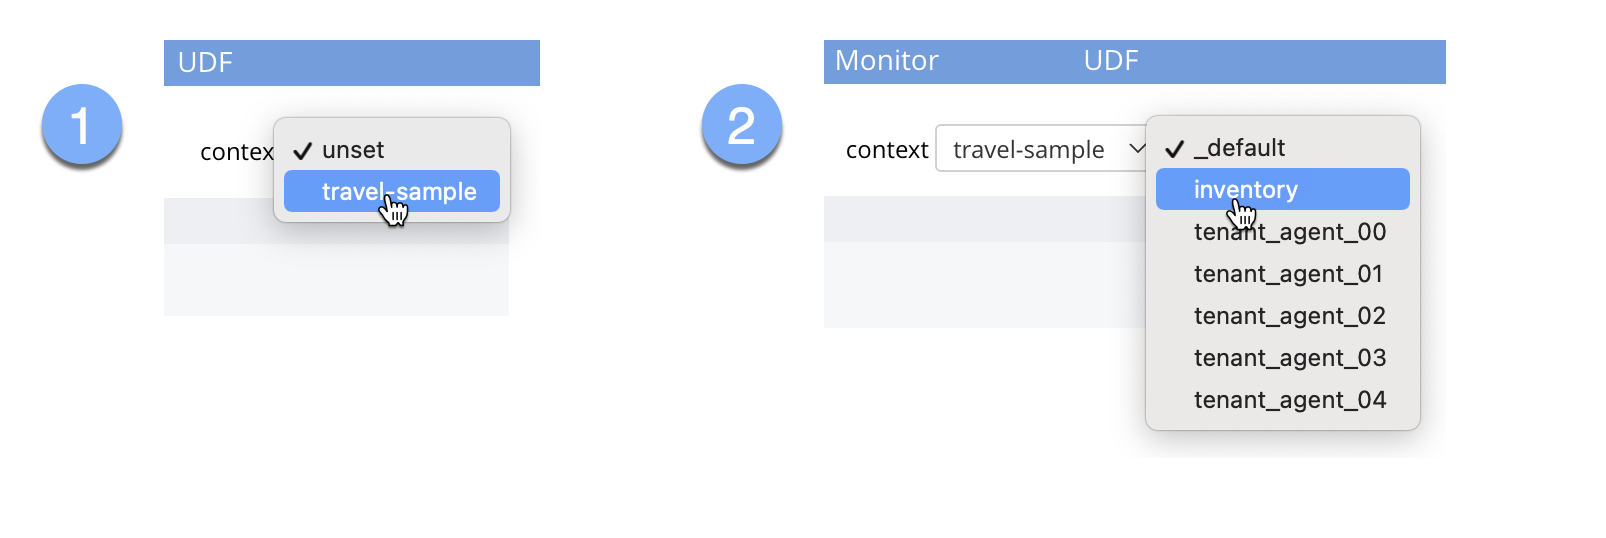 switch context to travel sample